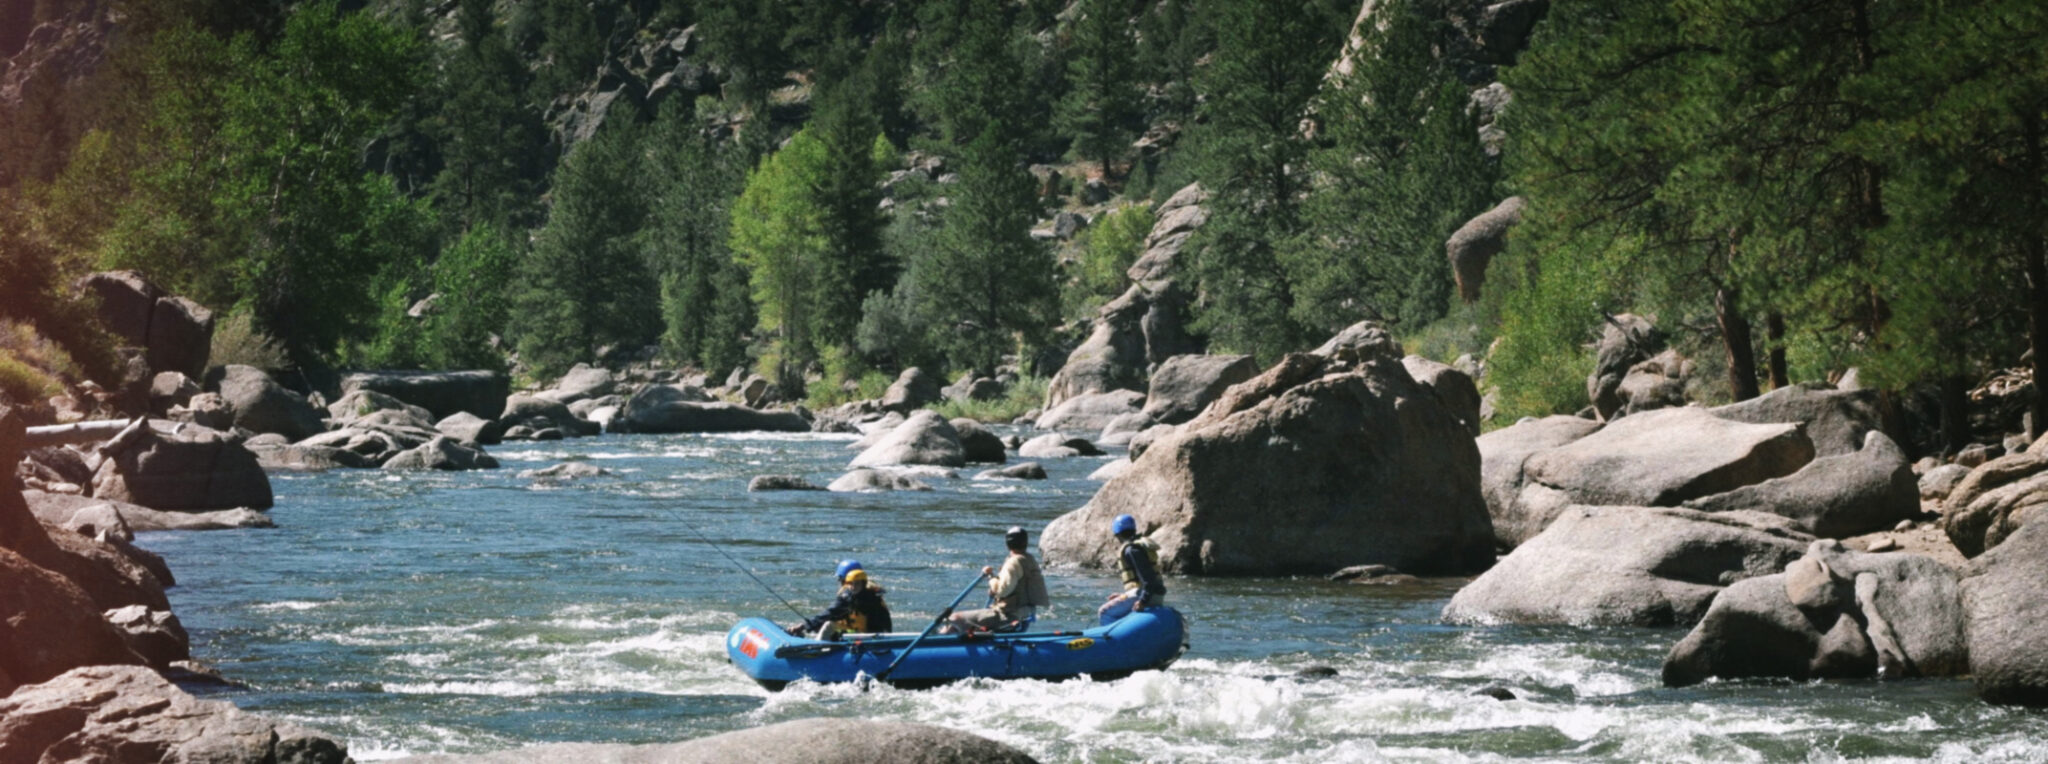 the adventure company whitewater rafting